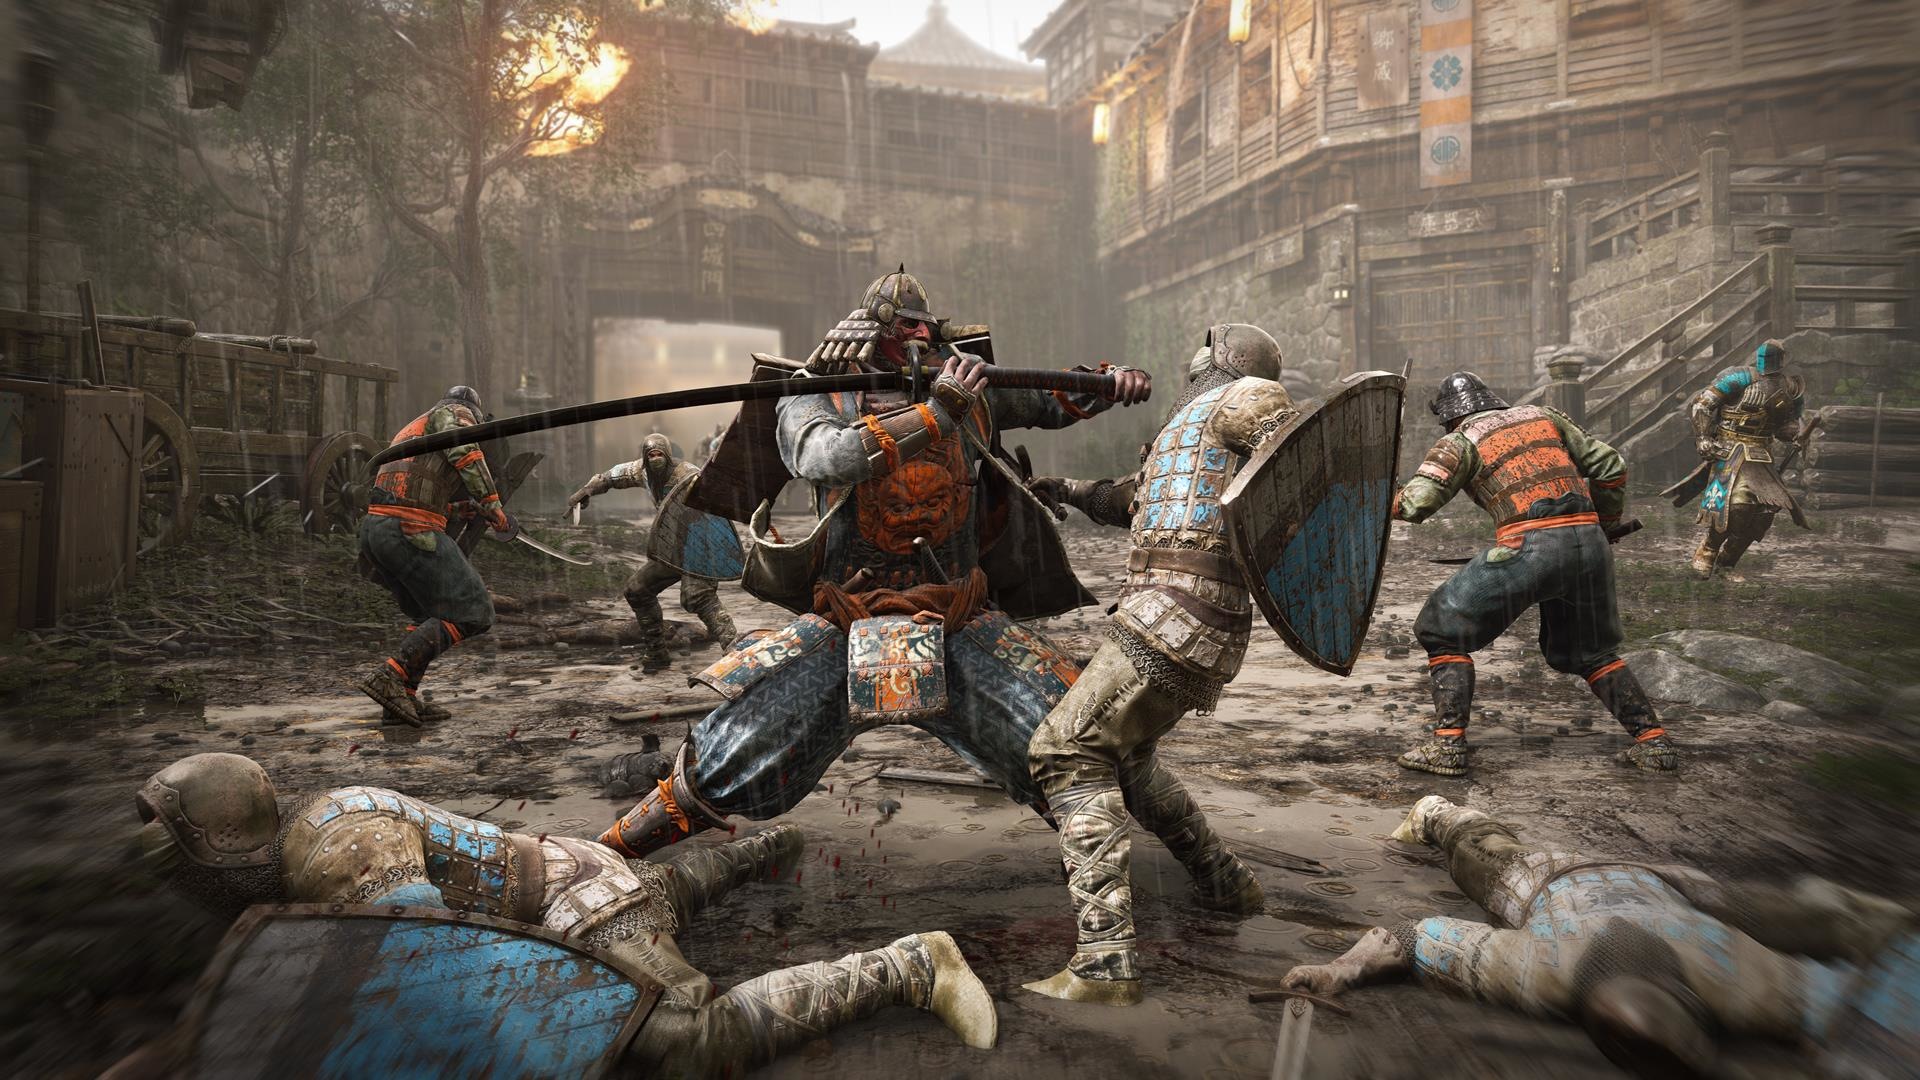 For Honor игра